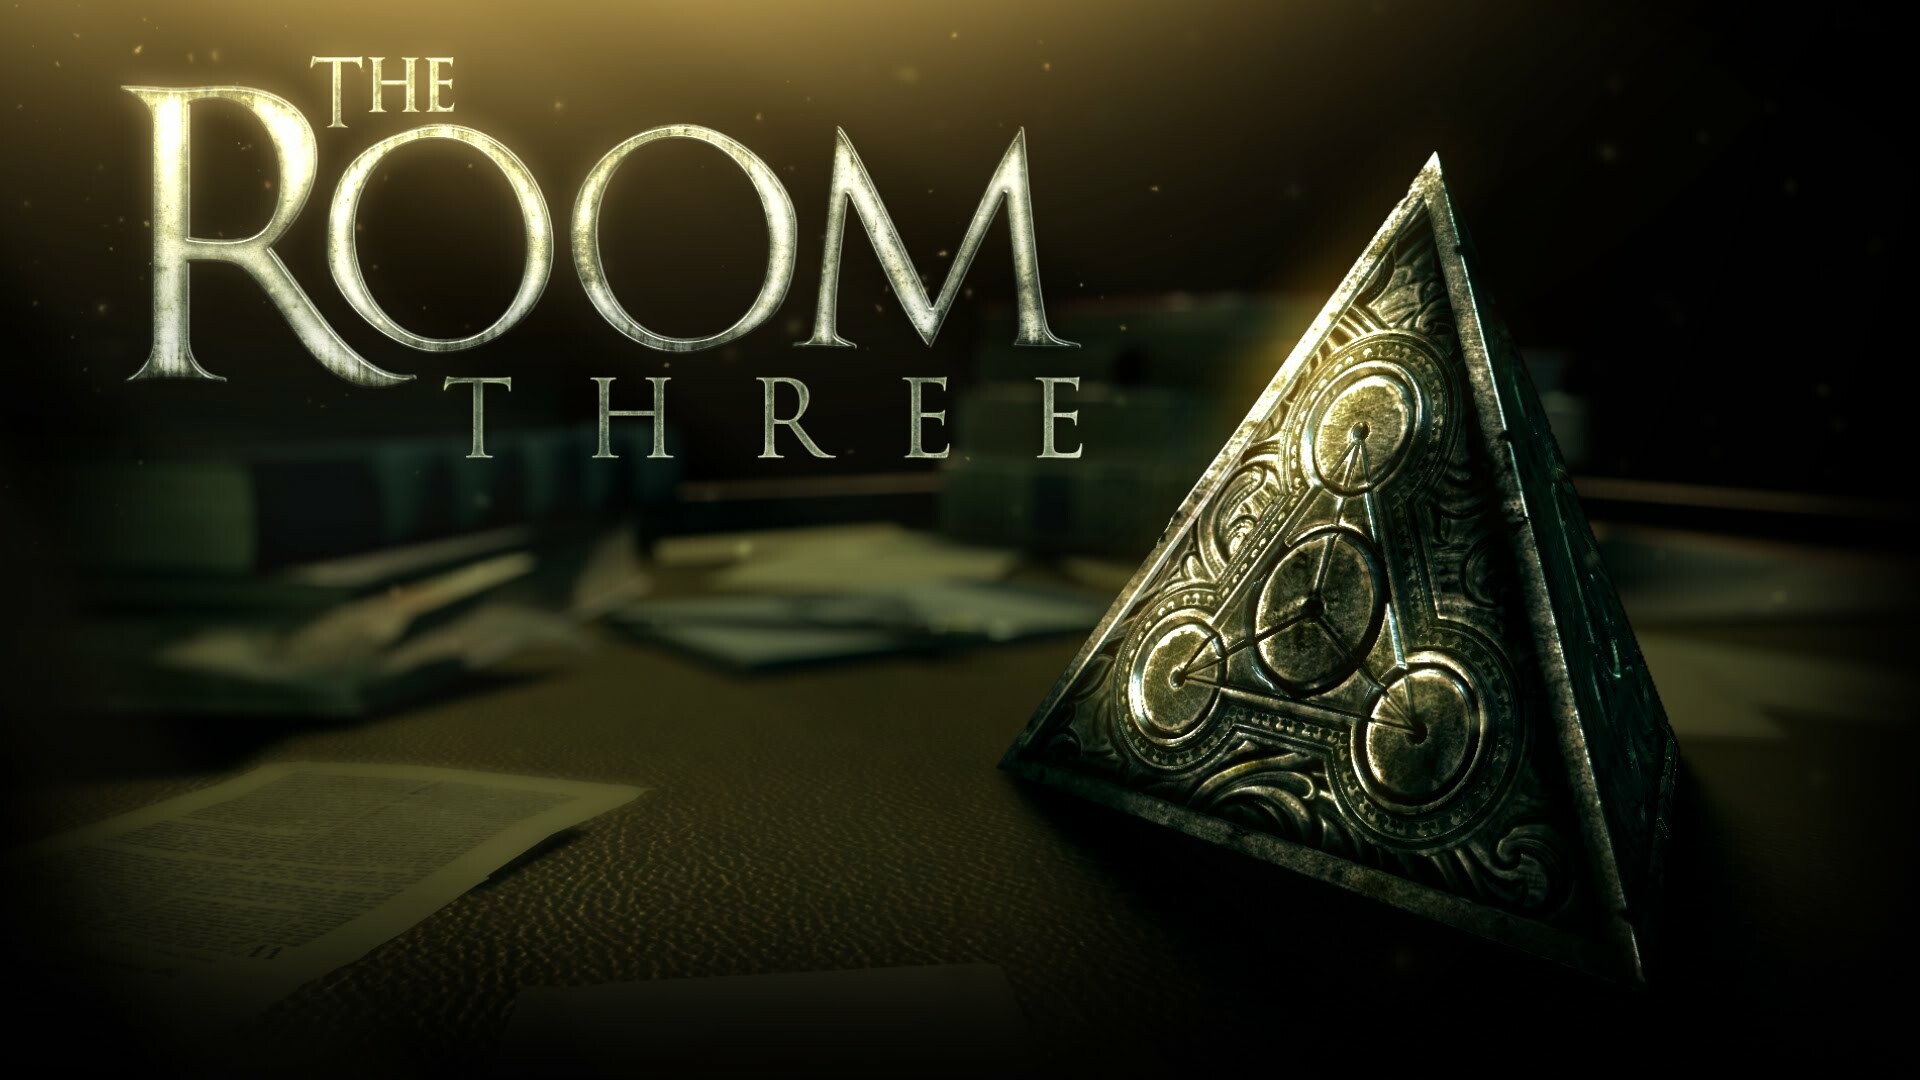 The Room: The game uses a variety of motions enabled by mobile device touchscreens to simulate actions in real life, such as looking around the device, turning keys, and activating switches. 1920x1080 Full HD Background.